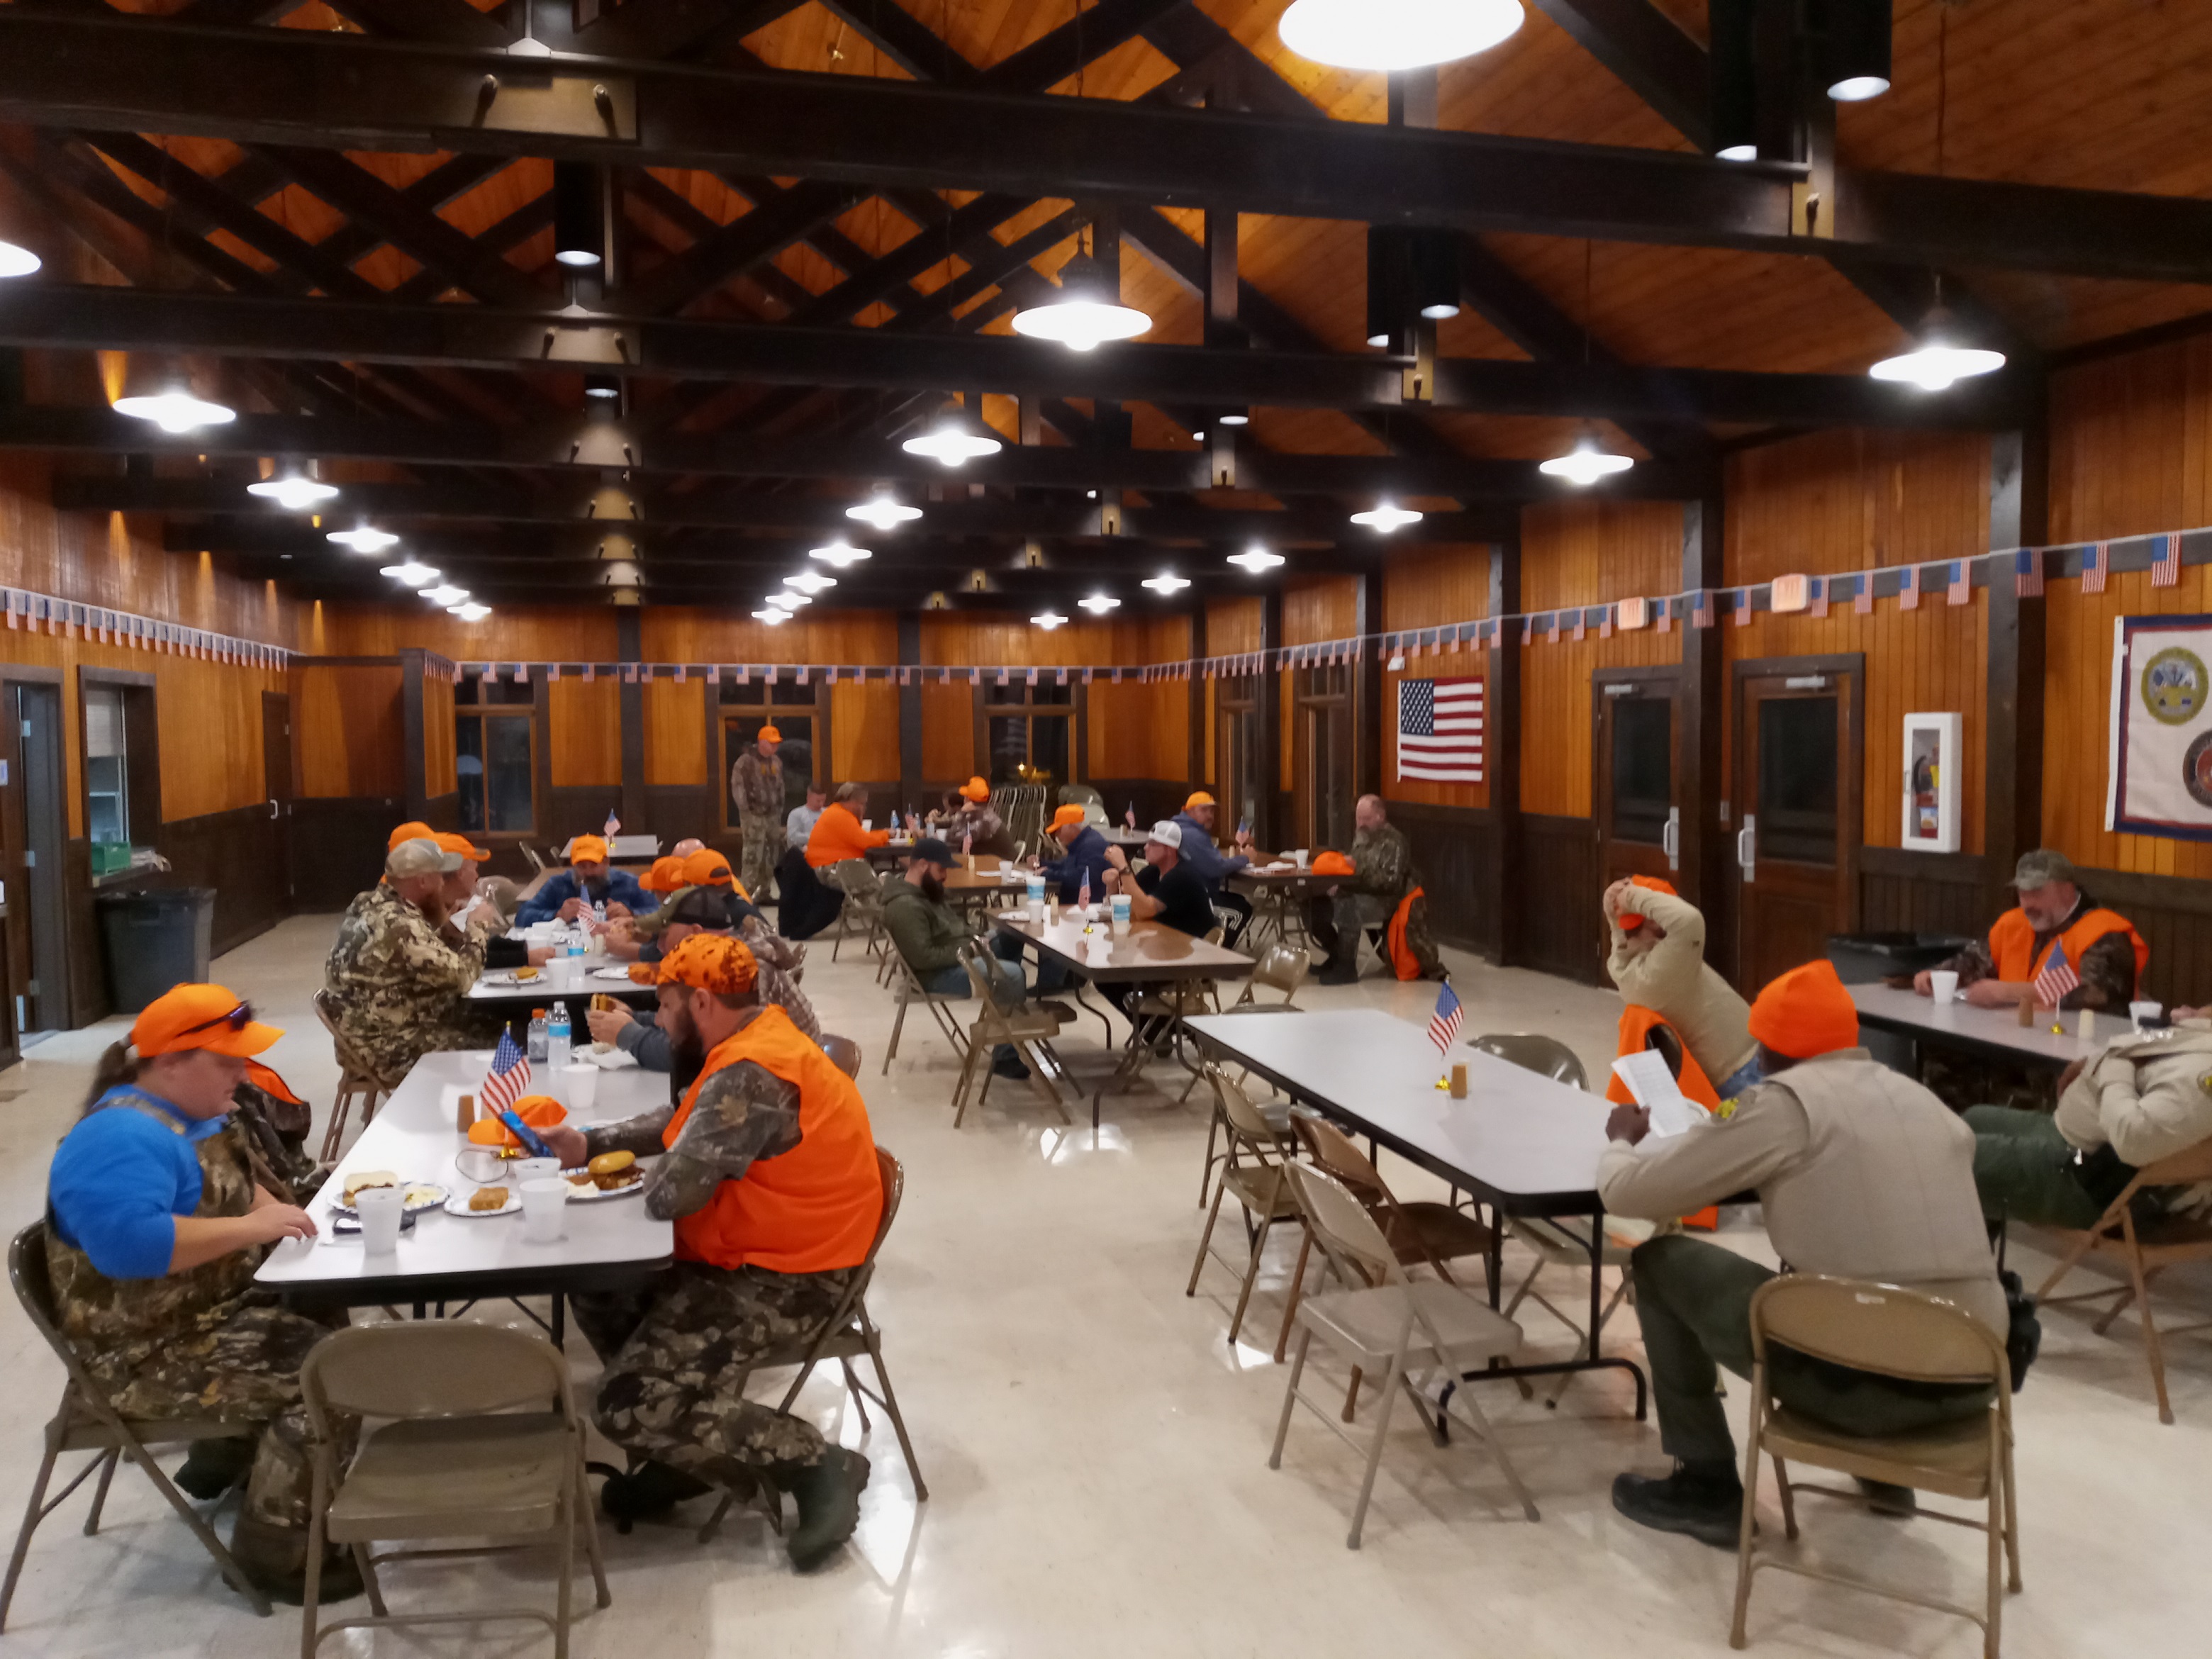 Veterans, staff and volunteers share a meal inside during the 2021 hunt.